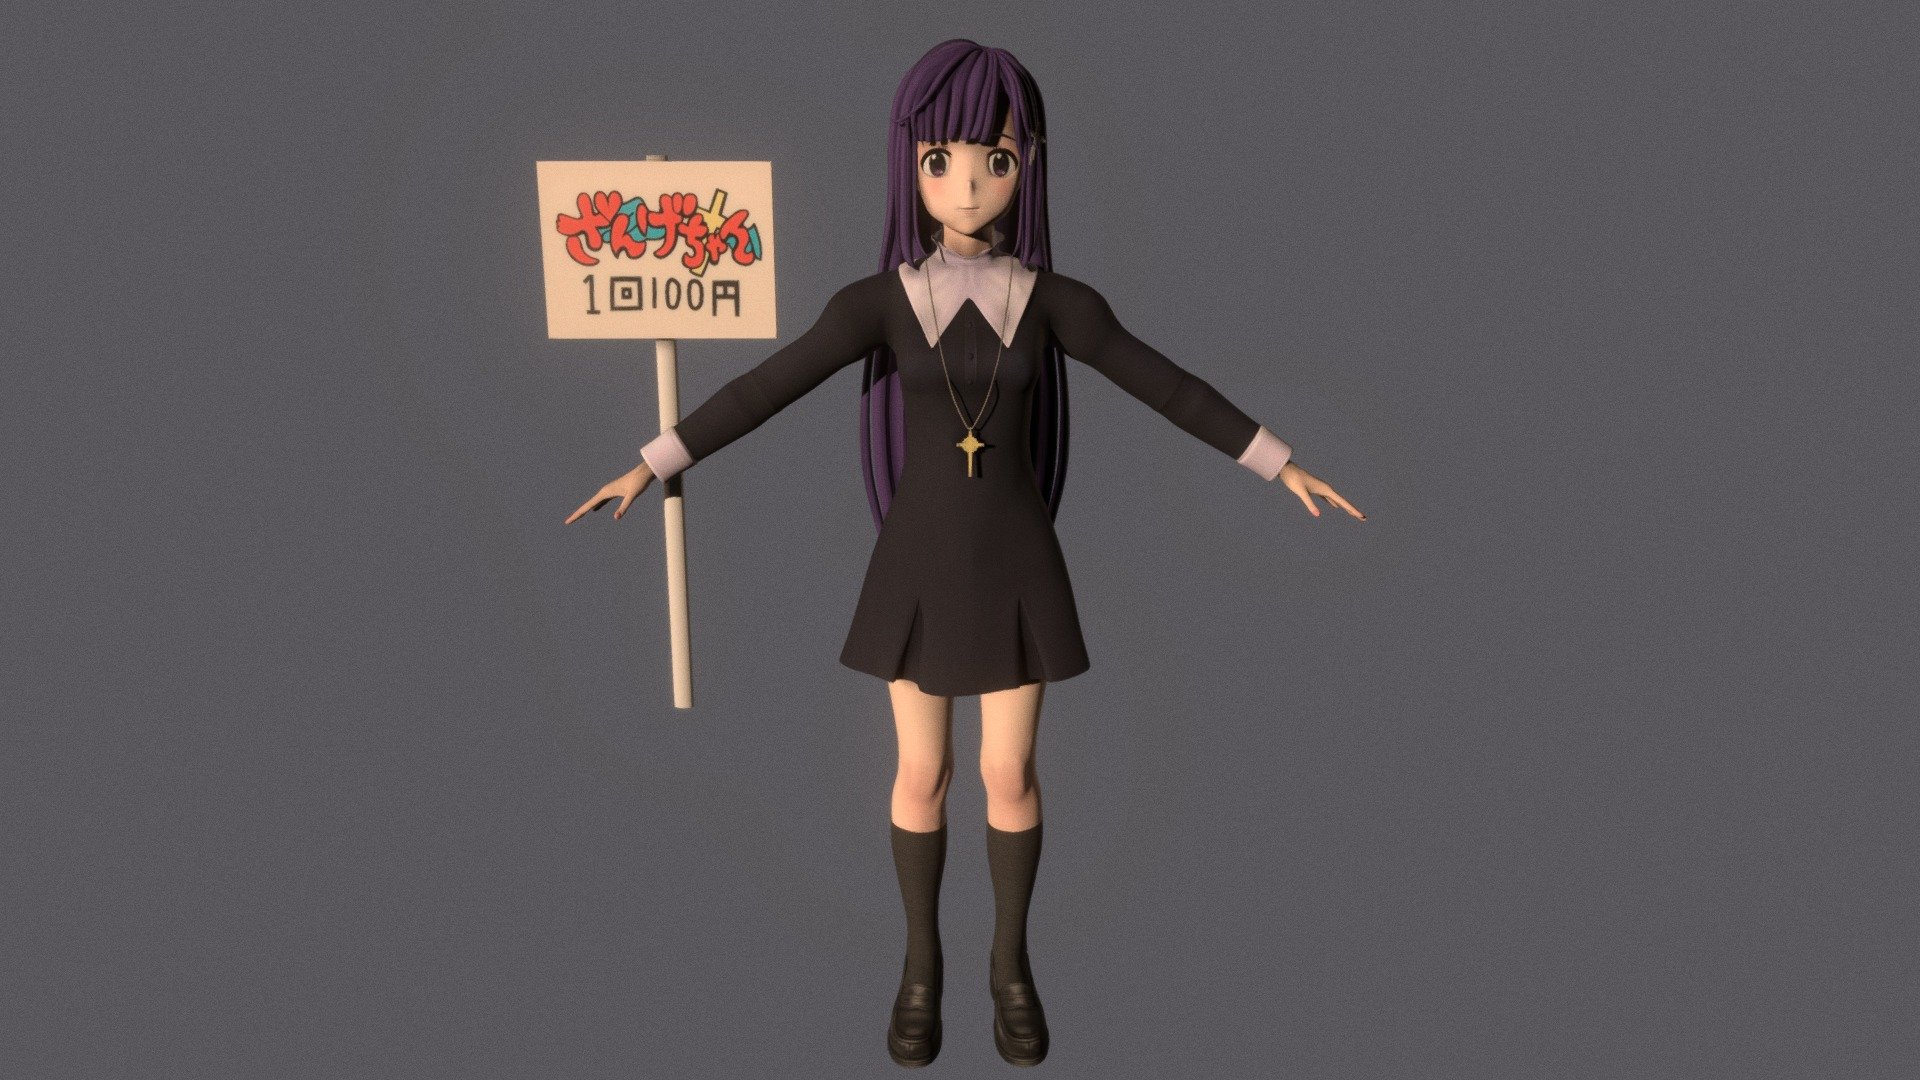 T-pose rigged model of anime girl Zange (Kannagi).

Body and clothings are rigged and skinned by 3ds Max CAT system.

Eye direction and facial animation controlled by Morpher modifier / Shape Keys / Blendshape.

This product include .FBX (ver. 7200) and .MAX (ver. 2010) files.

3ds Max version is turbosmoothed to give a high quality render (as you can see here).

Original main body mesh have ~7.000 polys.

This 3D model may need some tweaking to adapt the rig system to games engine and other platforms.

I support convert model to various file formats (the rig data will be lost in this process): 3DS; AI; ASE; DAE; DWF; DWG; DXF; FLT; HTR; IGS; M3G; MQO; OBJ; SAT; STL; W3D; WRL; X.

You can buy all of my models in one pack to save cost: https://sketchfab.com/3d-models/all-of-my-anime-girls-c5a56156994e4193b9e8fa21a3b8360b

And I can make commission models.

If you have any questions, please leave a comment or contact me via my email 3d.eden.project@gmail.com 3d model